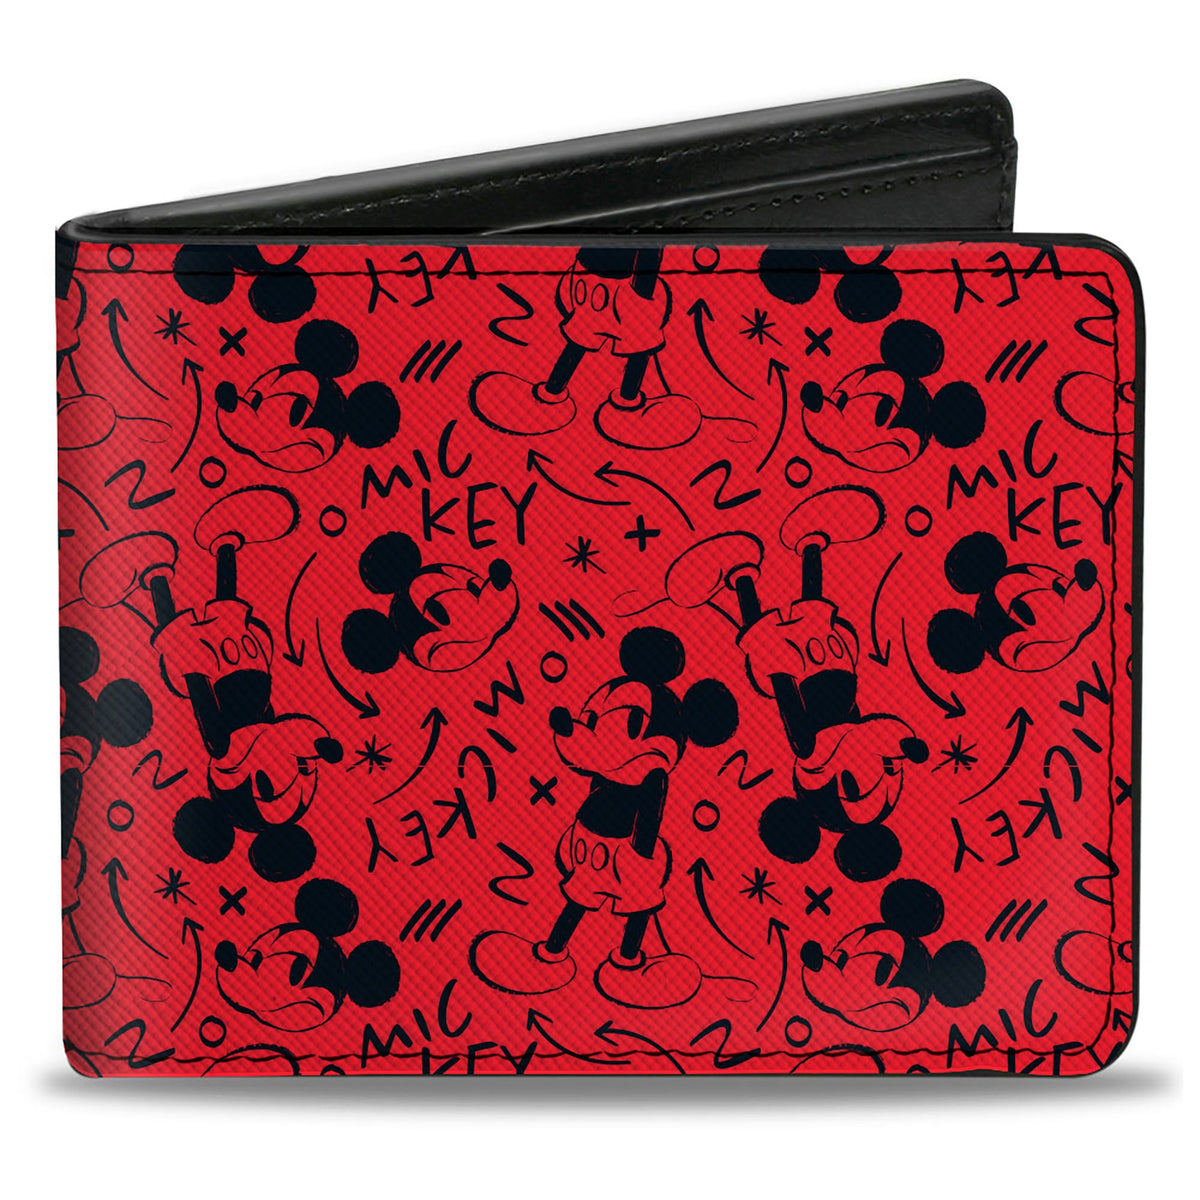 Bi-Fold Wallet - Mickey Mouse Pose and Expression Scattered Red/Black